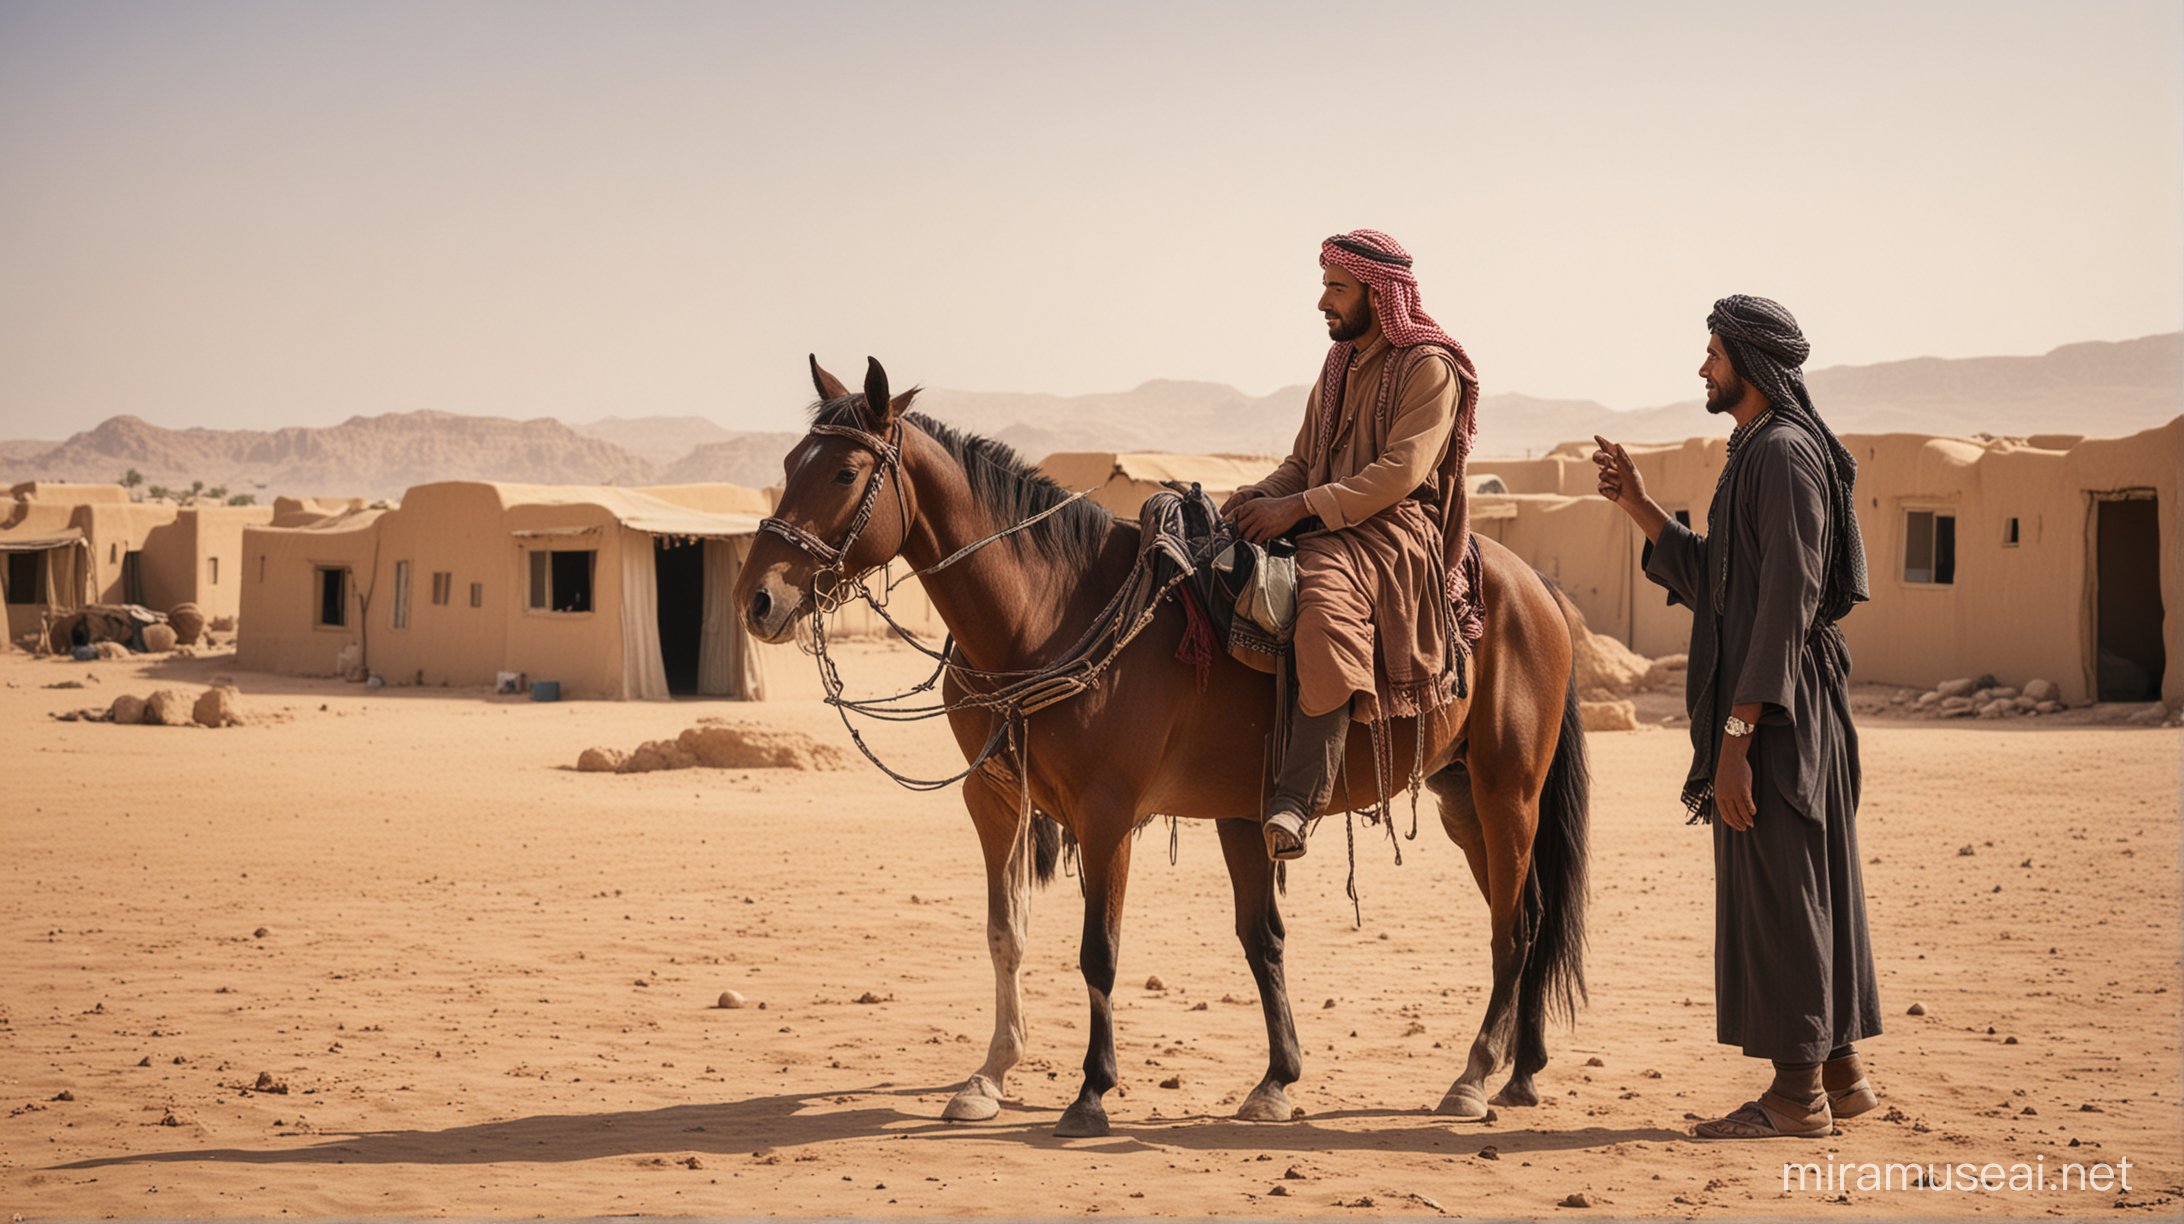 Bedouin Man with Horse Near Traditional Desert Home